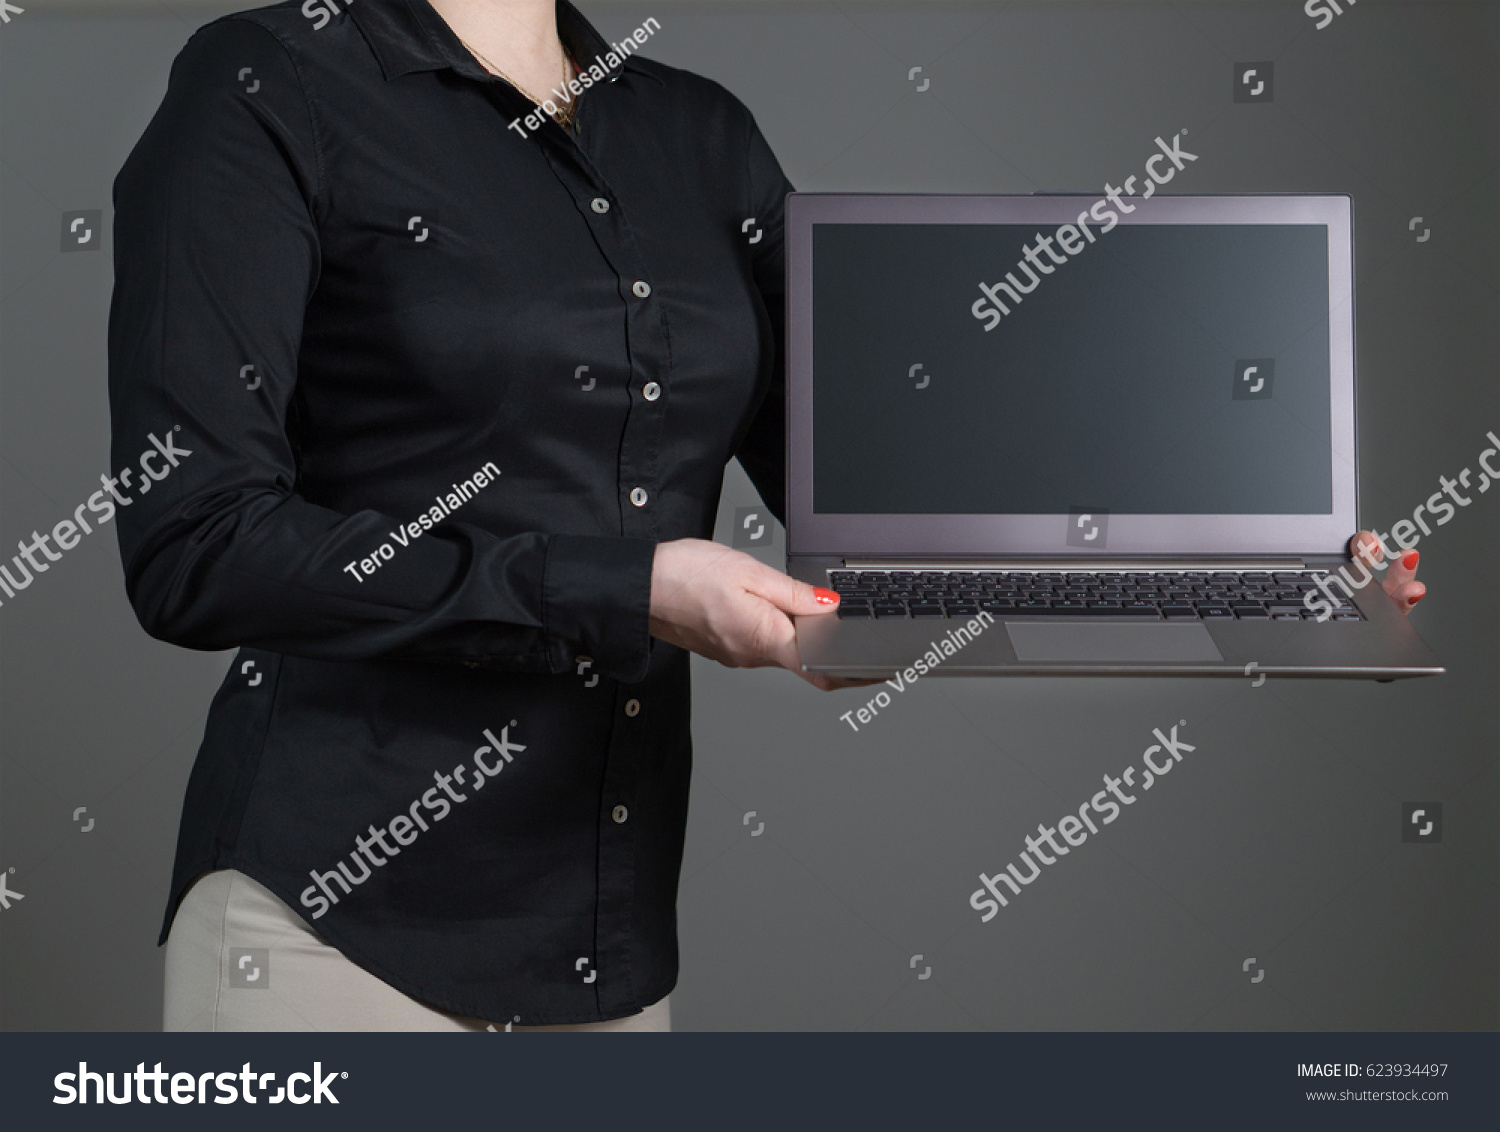 Business woman presenting a software or showing an application. Girl holding laptop with dynamic pose and black collared shirt. Empty screen with copy space for text or content. Gray background. #623934497